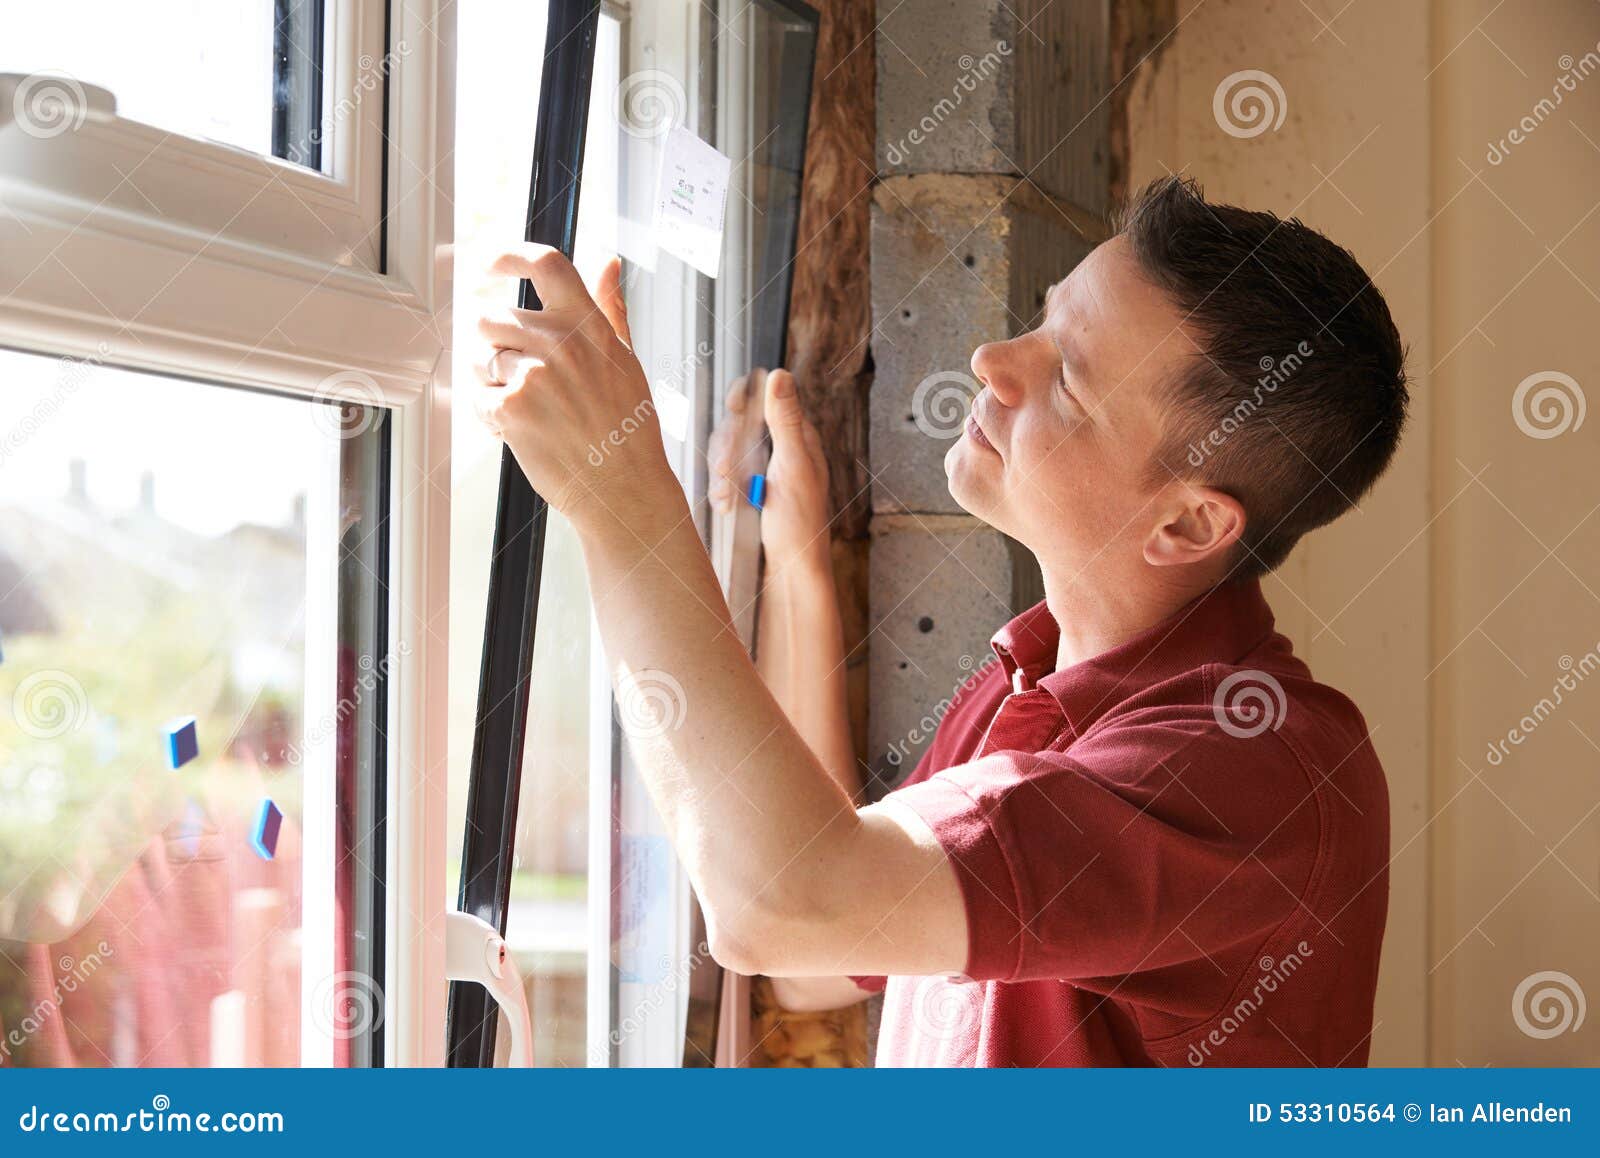 construction worker installing new windows in house